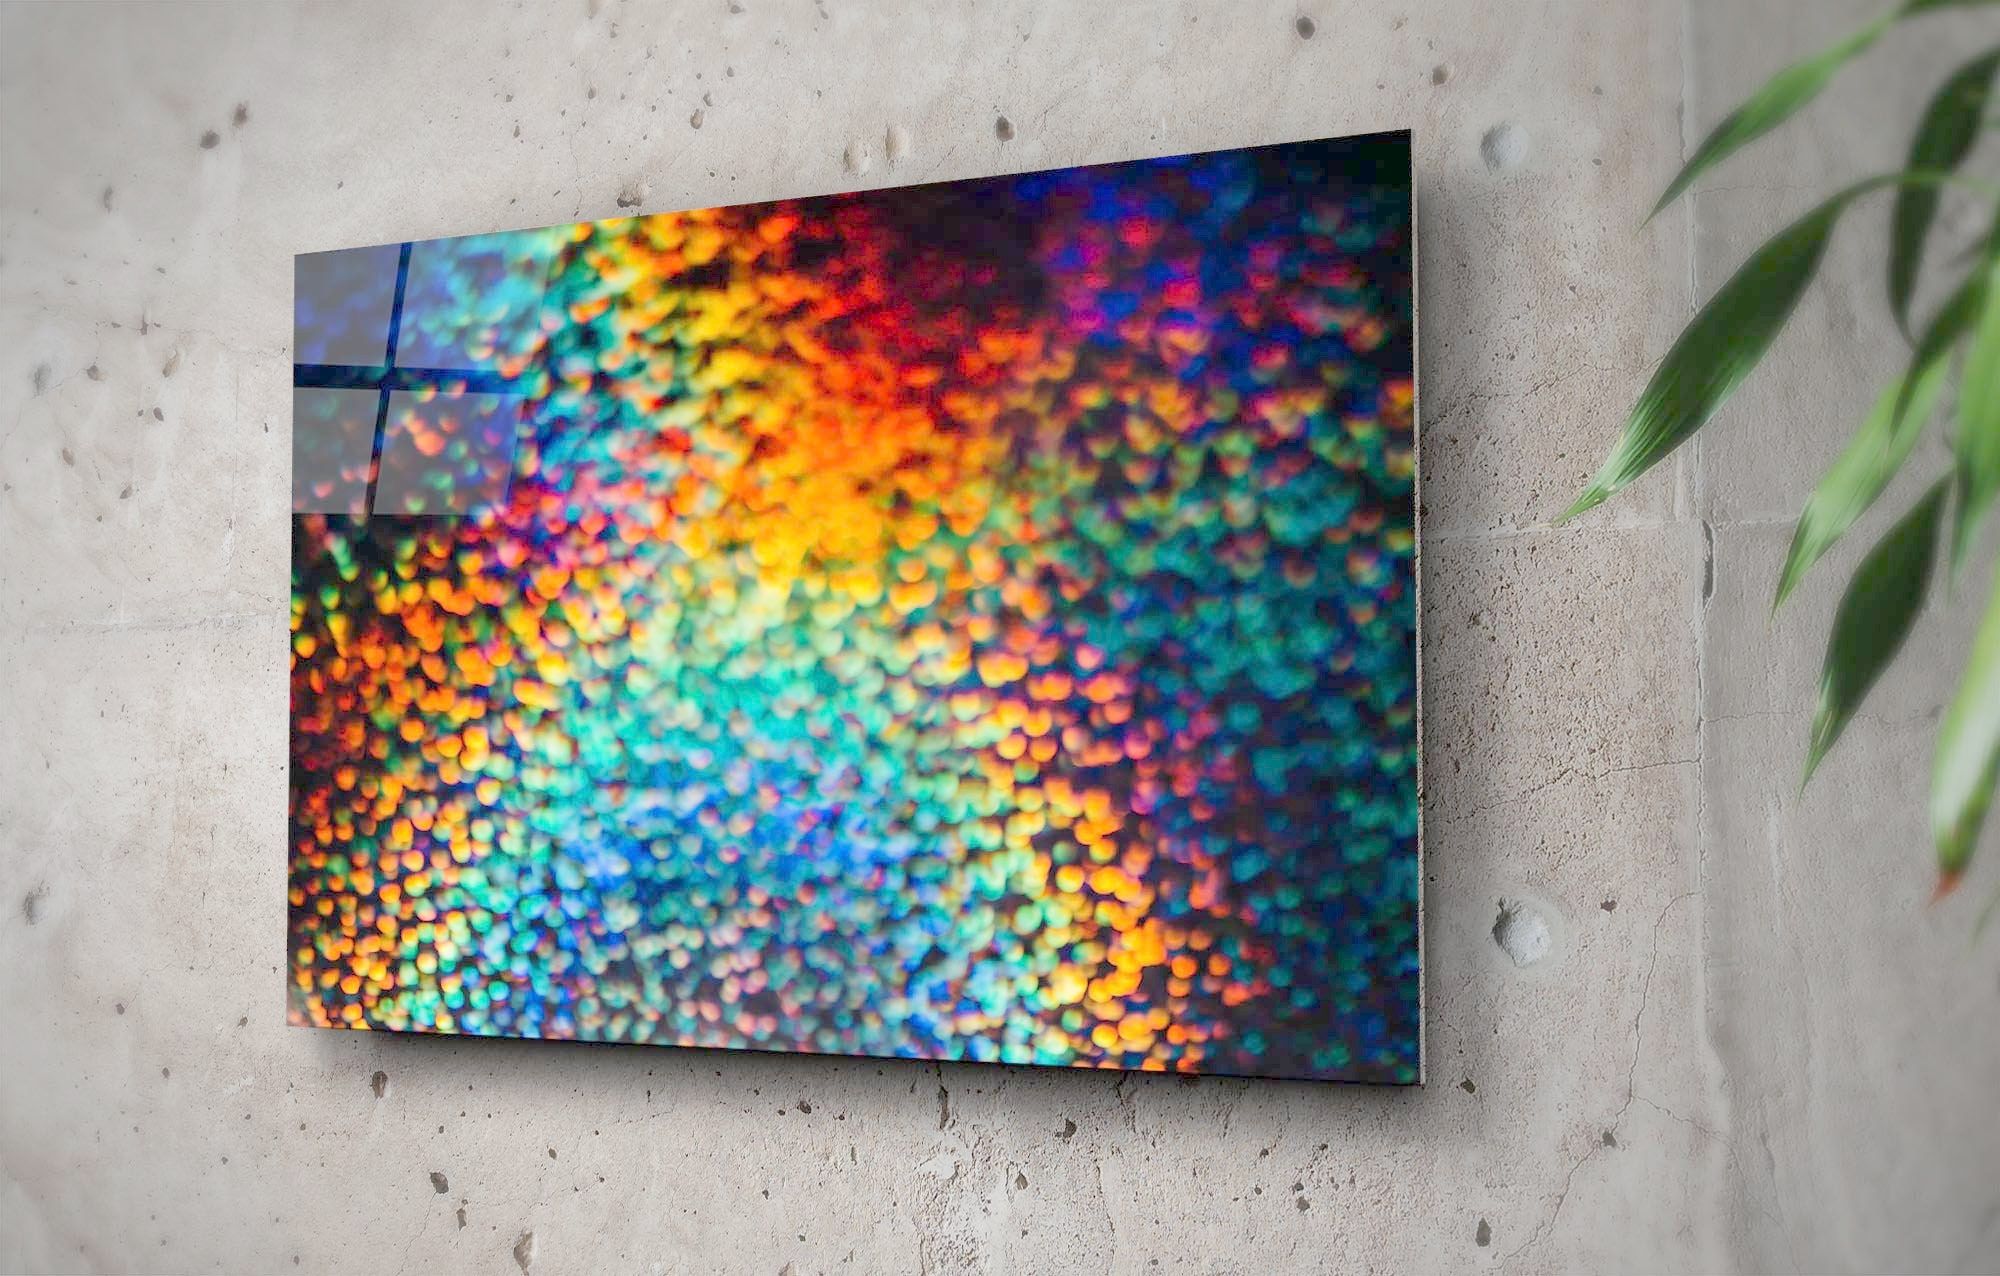 Holographic Wall Art Holo Rainbow Reflection Home Decor | Etsy With Most Recent Reflection Wall Art (View 6 of 20)